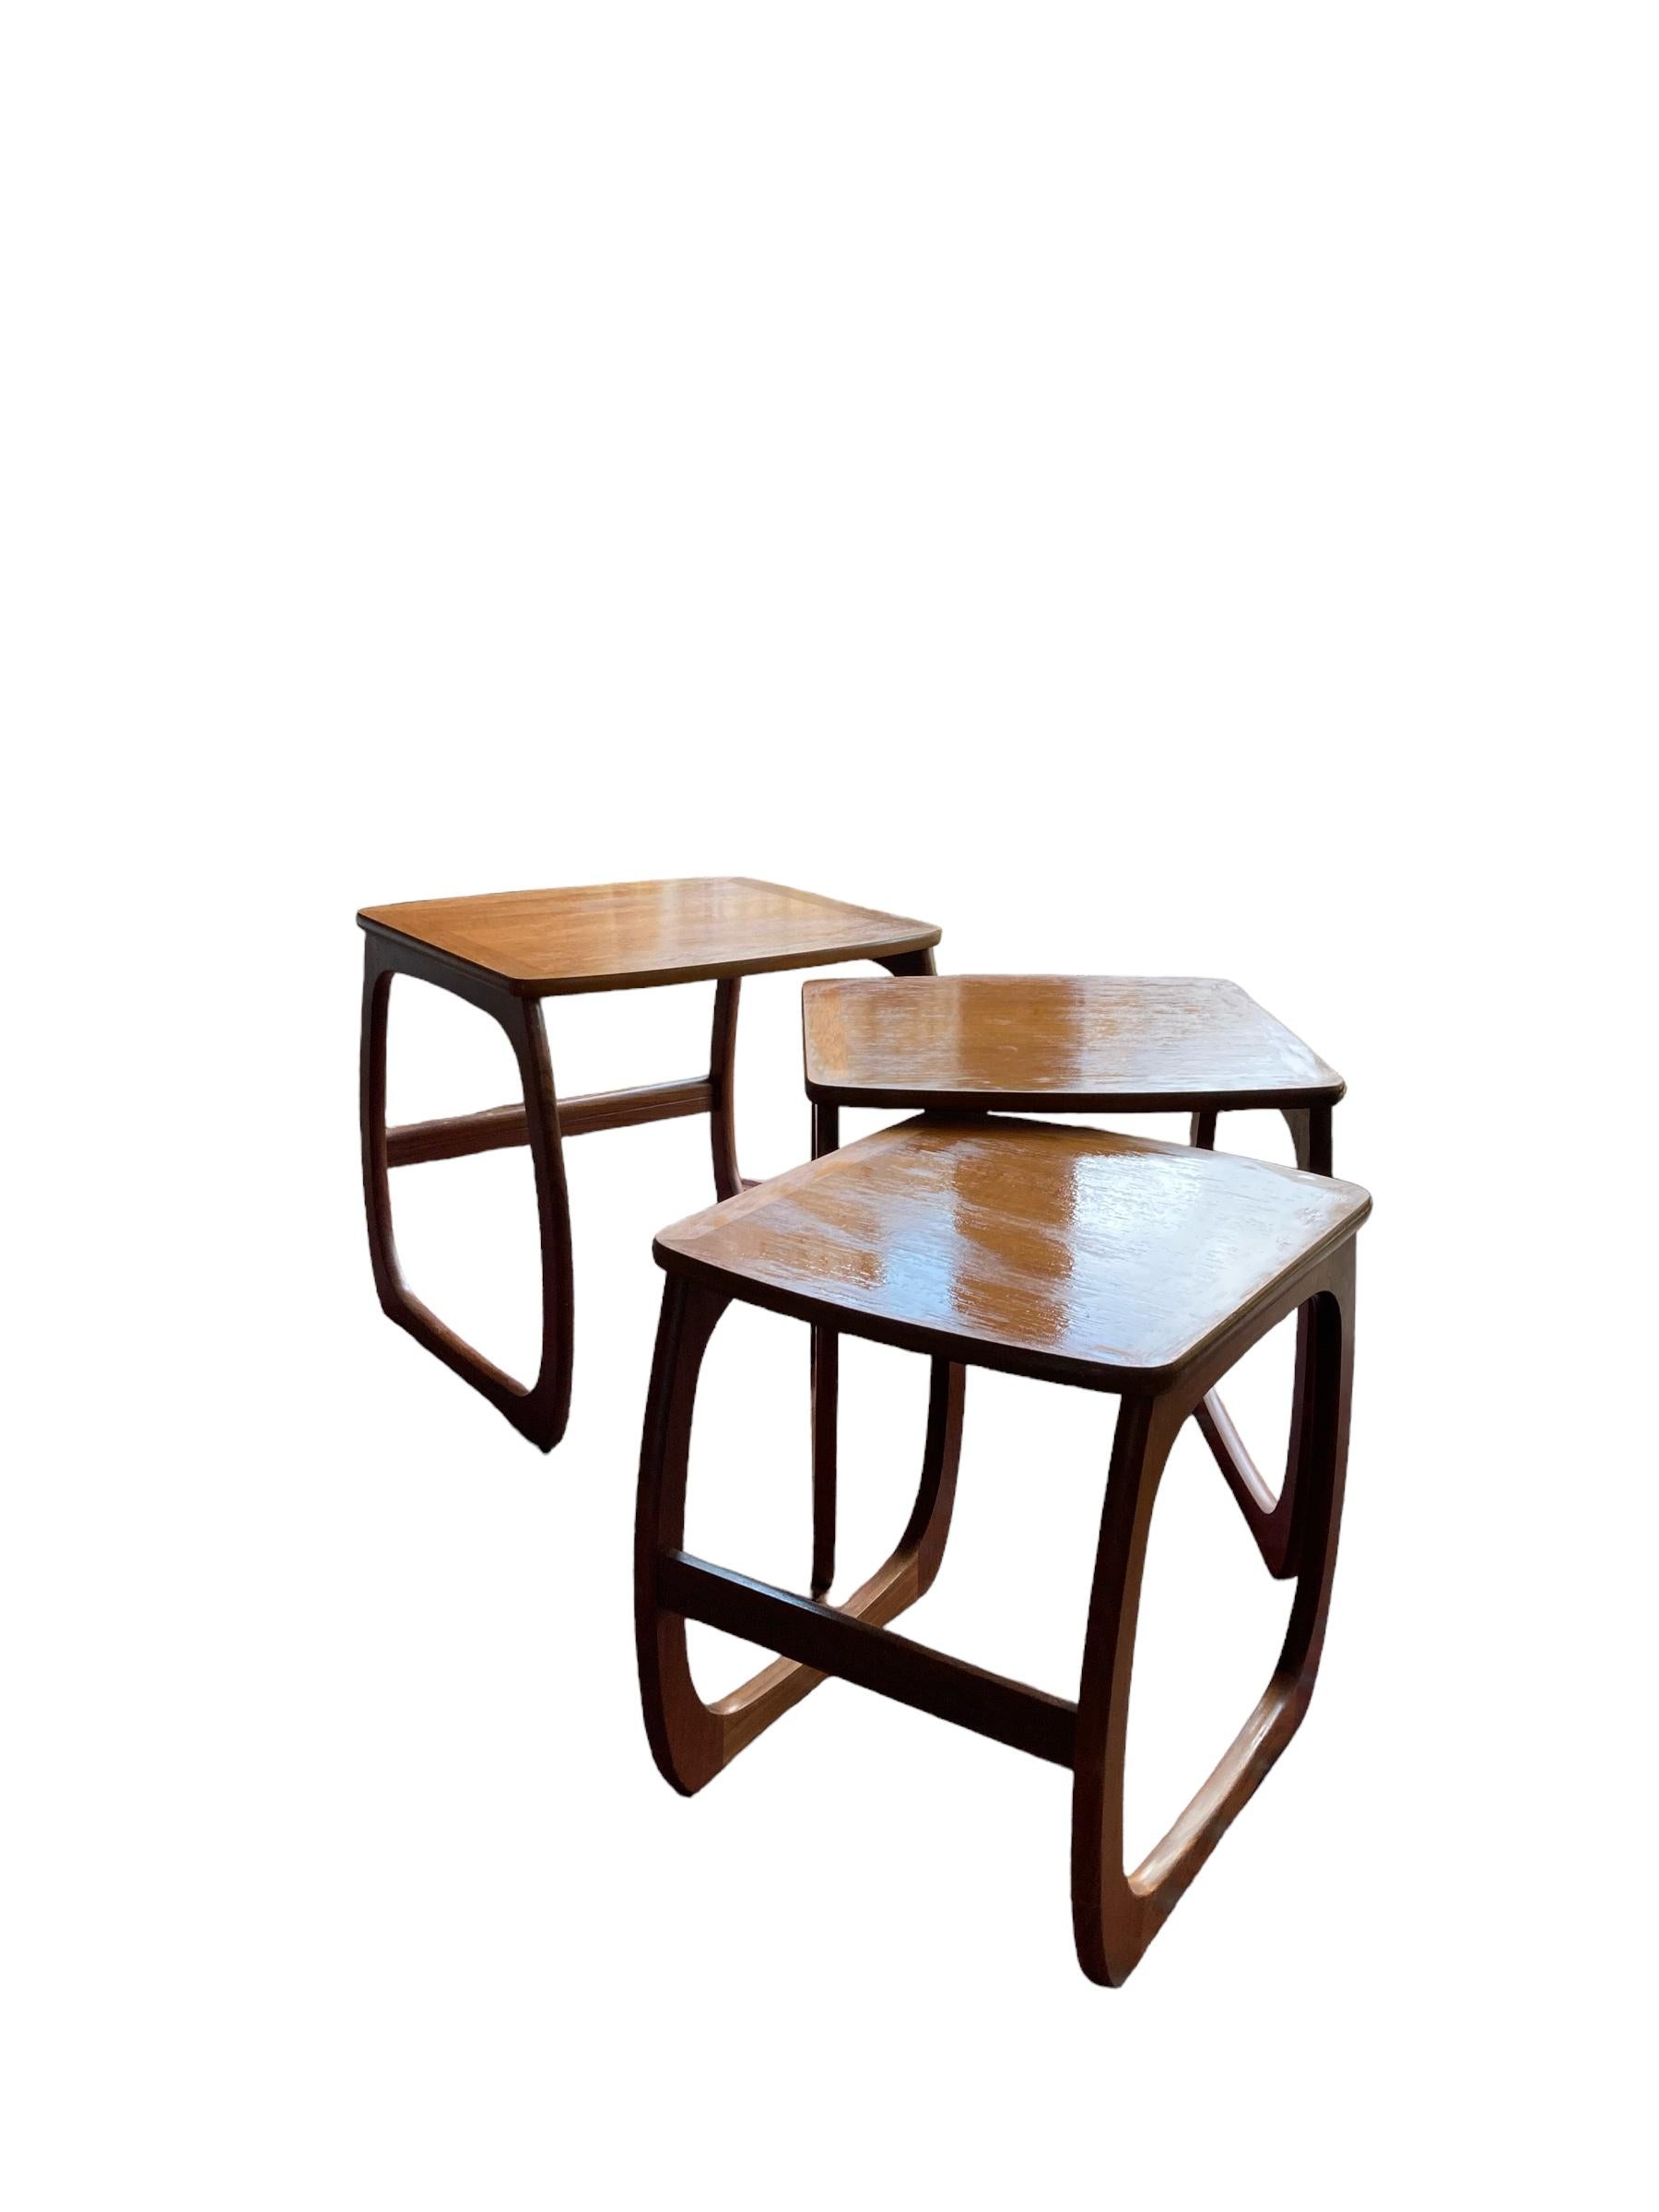 Nathan Nest of Teak Tables, Mid Century Design with elegantly curved legs and a sleek top. Crafted with precision and attention to detail, these tables are the epitome of timeless beauty and functionality. Made from Teak wood, they boast a sturdy